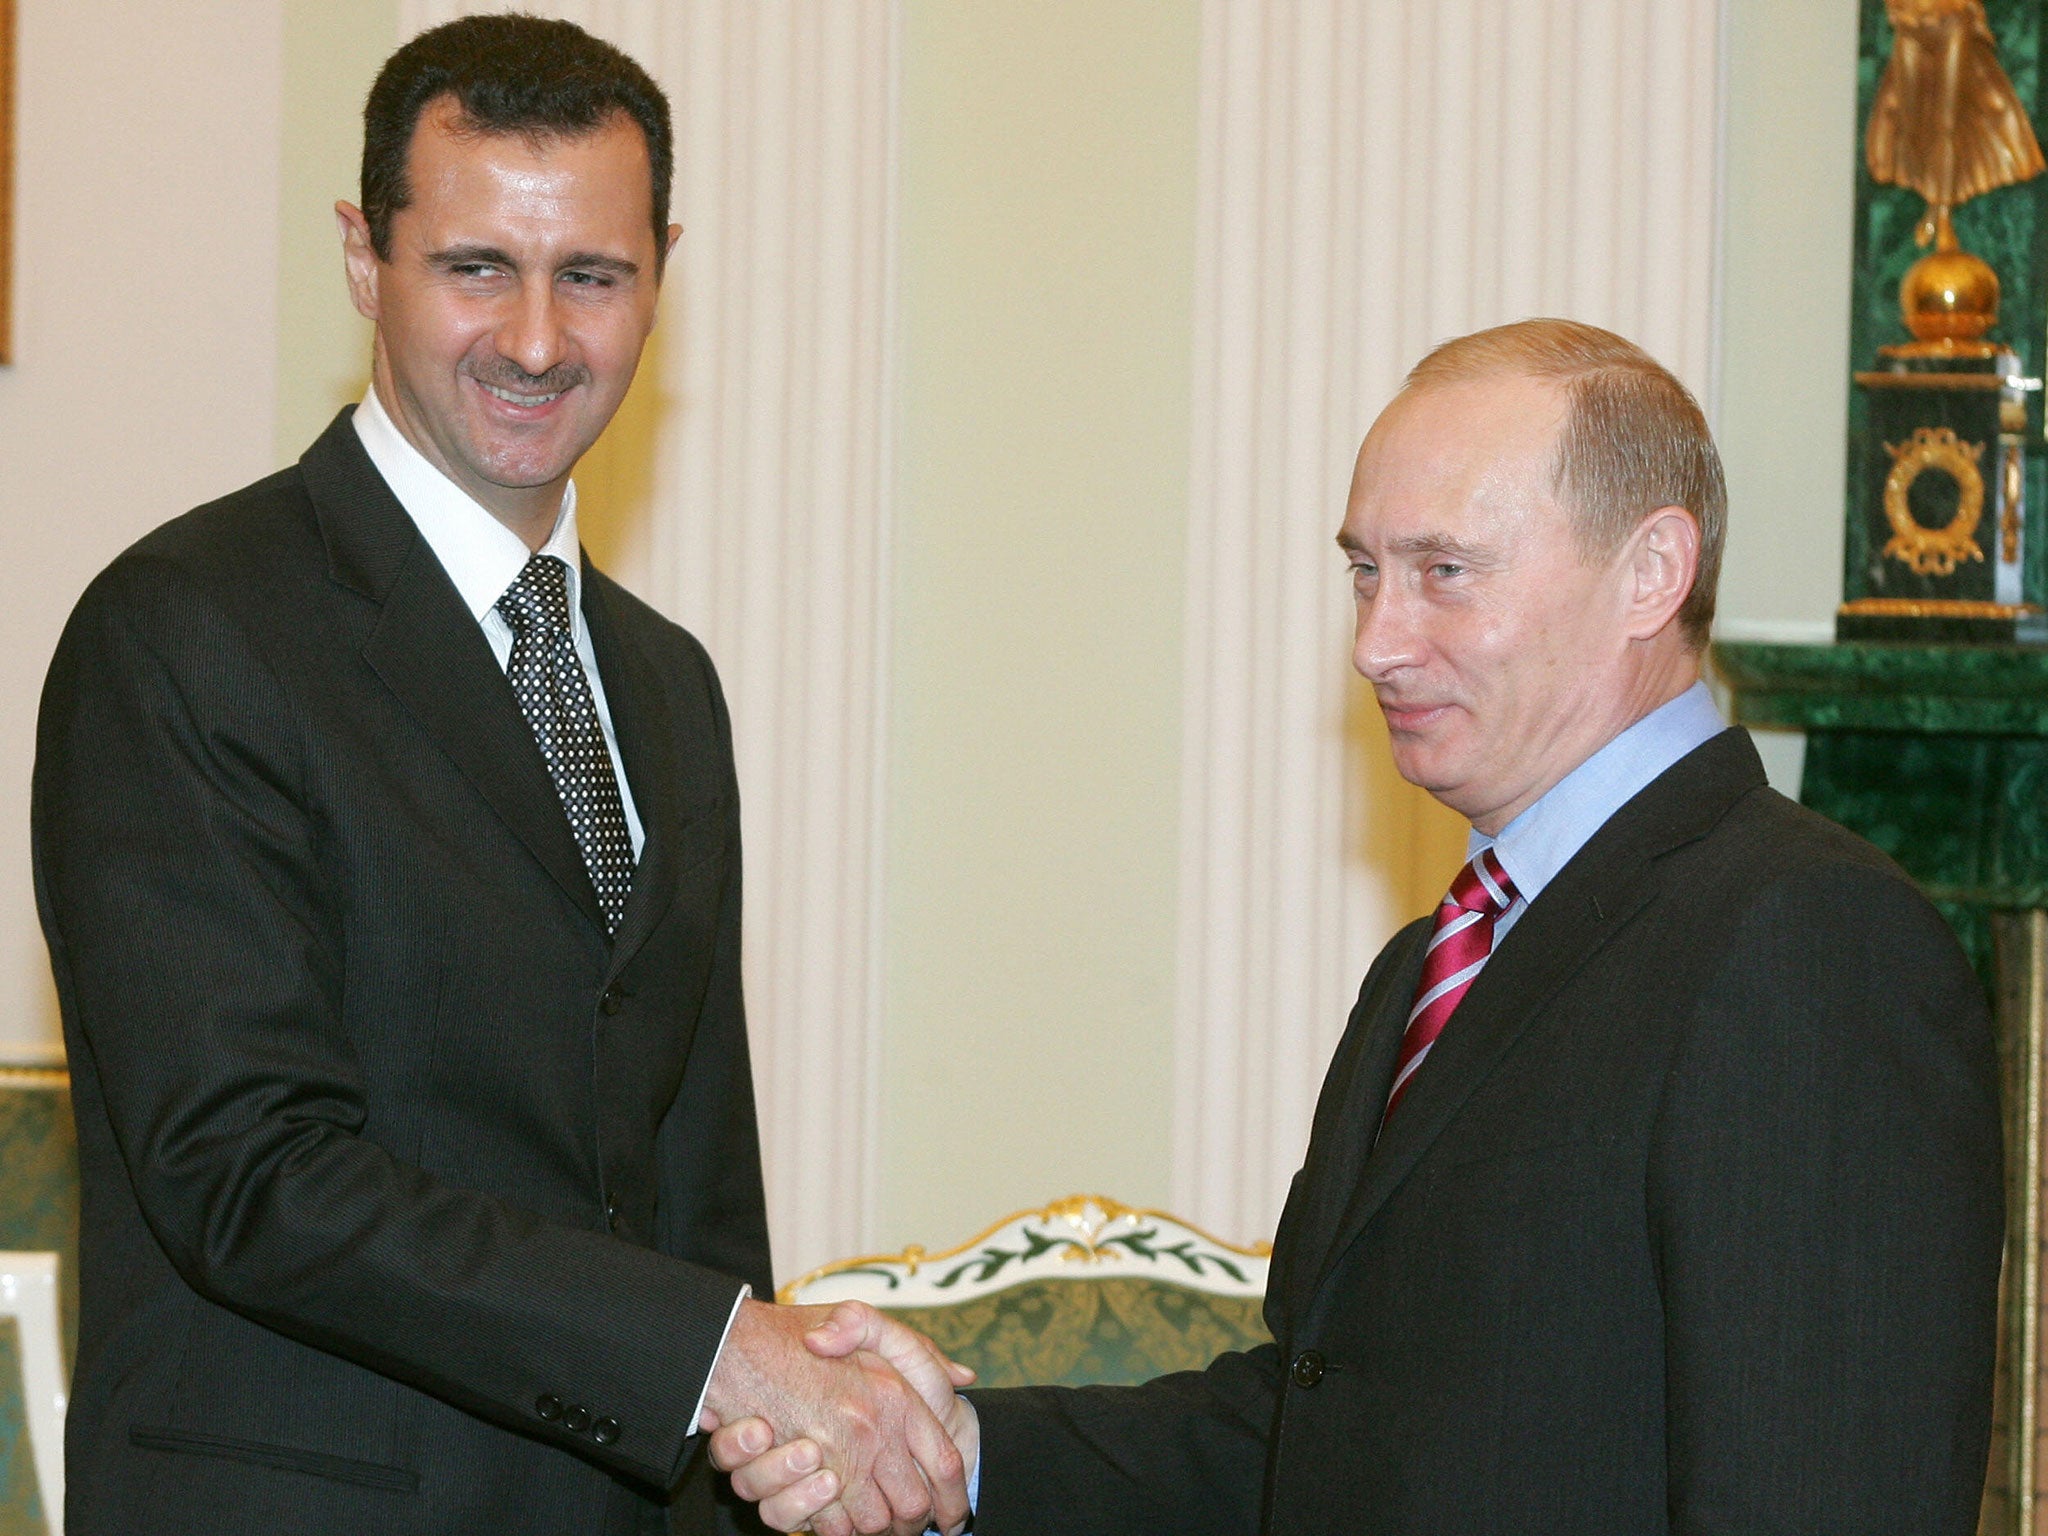 Vladimir Putin's alliance with Bashar al-Assad has previously been an obstacle to military co-operation